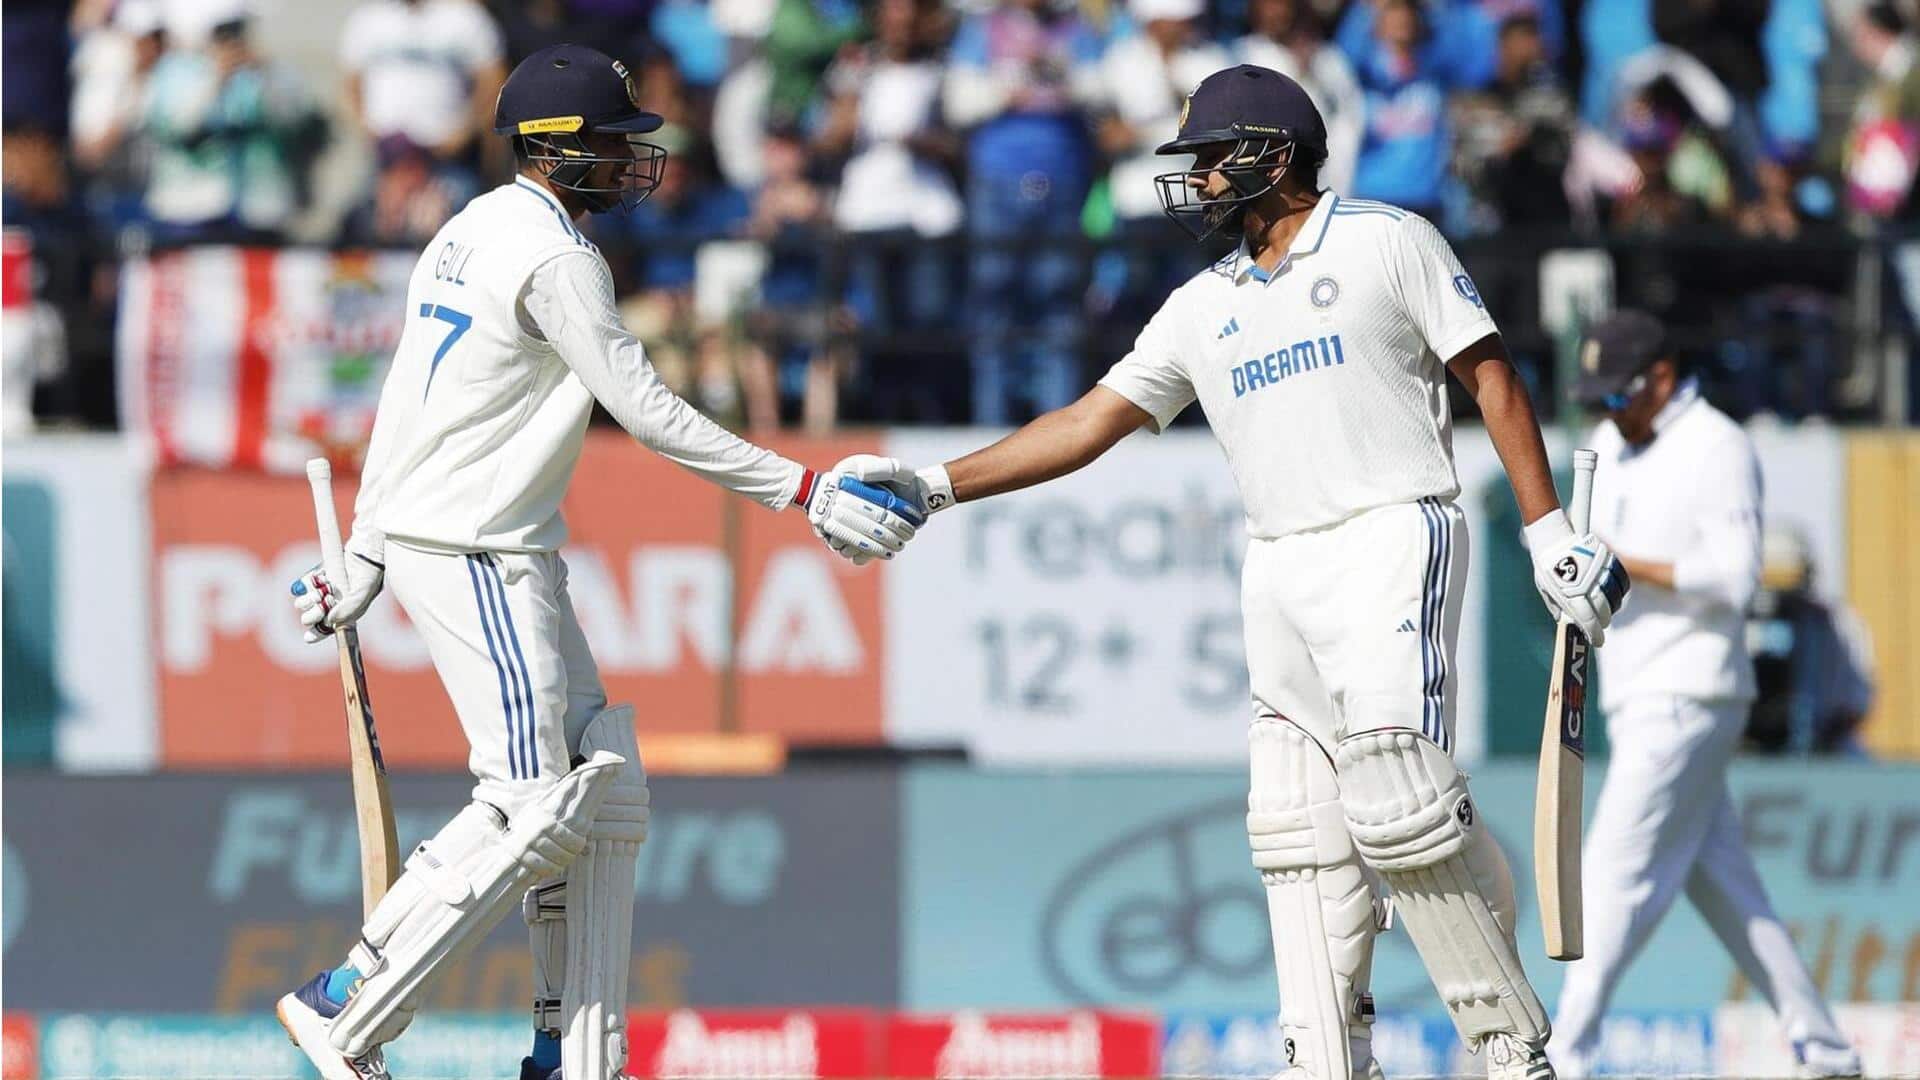 All-round India demolish England in Dharamsala Test, clinch series 4-1